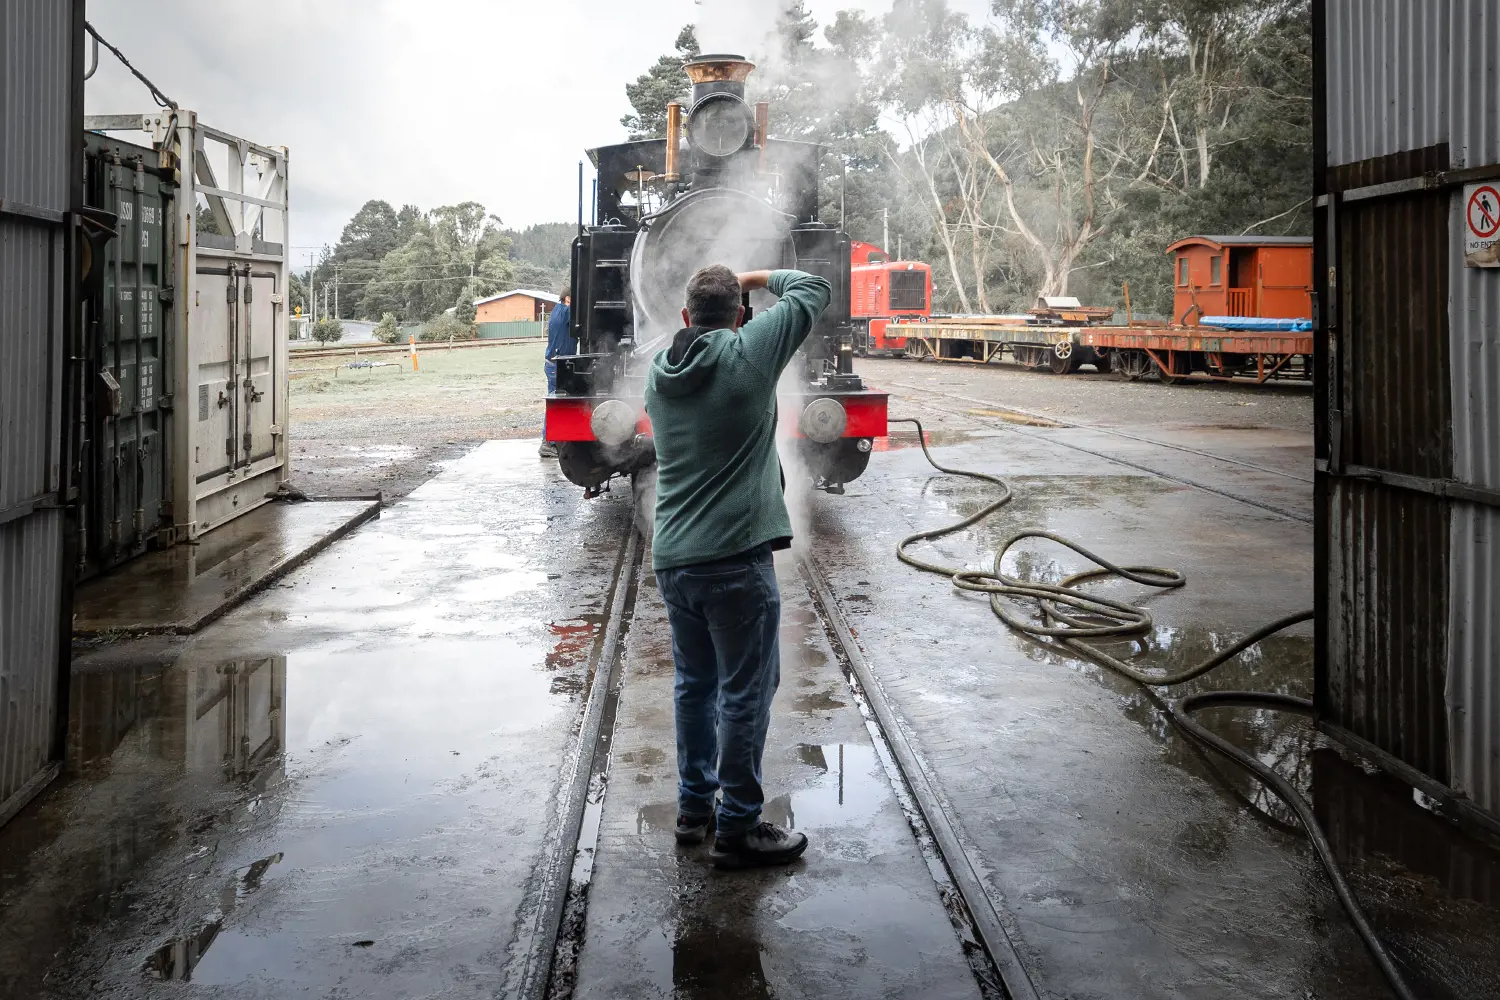 A man stands on the tracks of a locomotive steam train in a maintenance yard and takes a photograph.